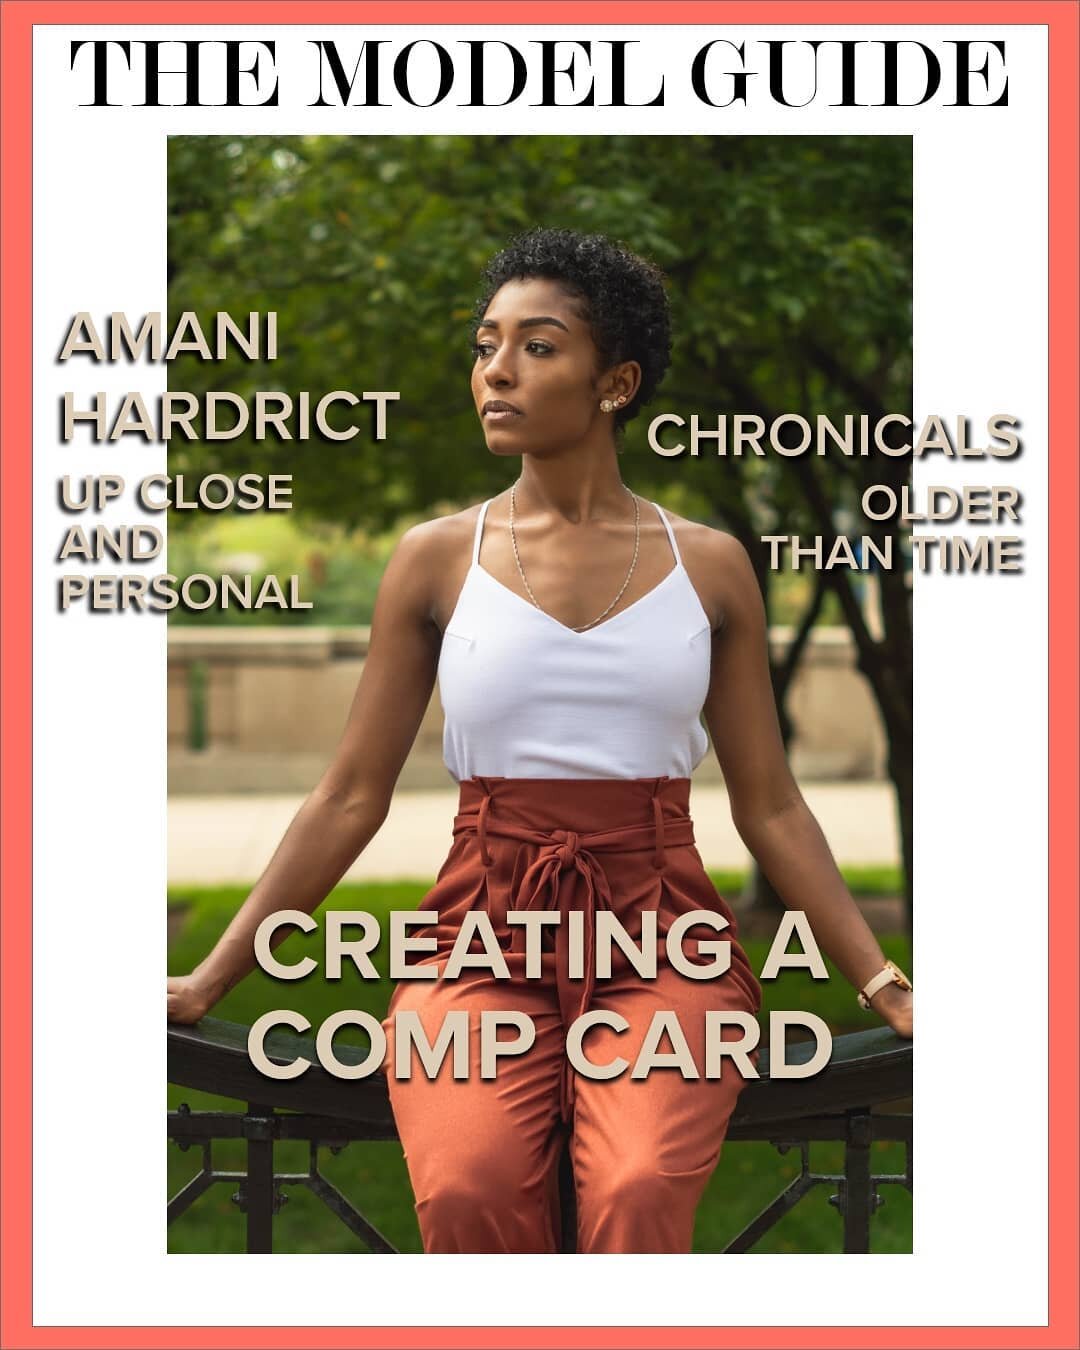 Modeling Tips and Tricks: Creating A Comp Card

Creating a comp card is essential for any model, especially if you're looking to get signed to an agency or are looking for larger budget work. Swipe for my tips on creating one!

Drop a comment on any 